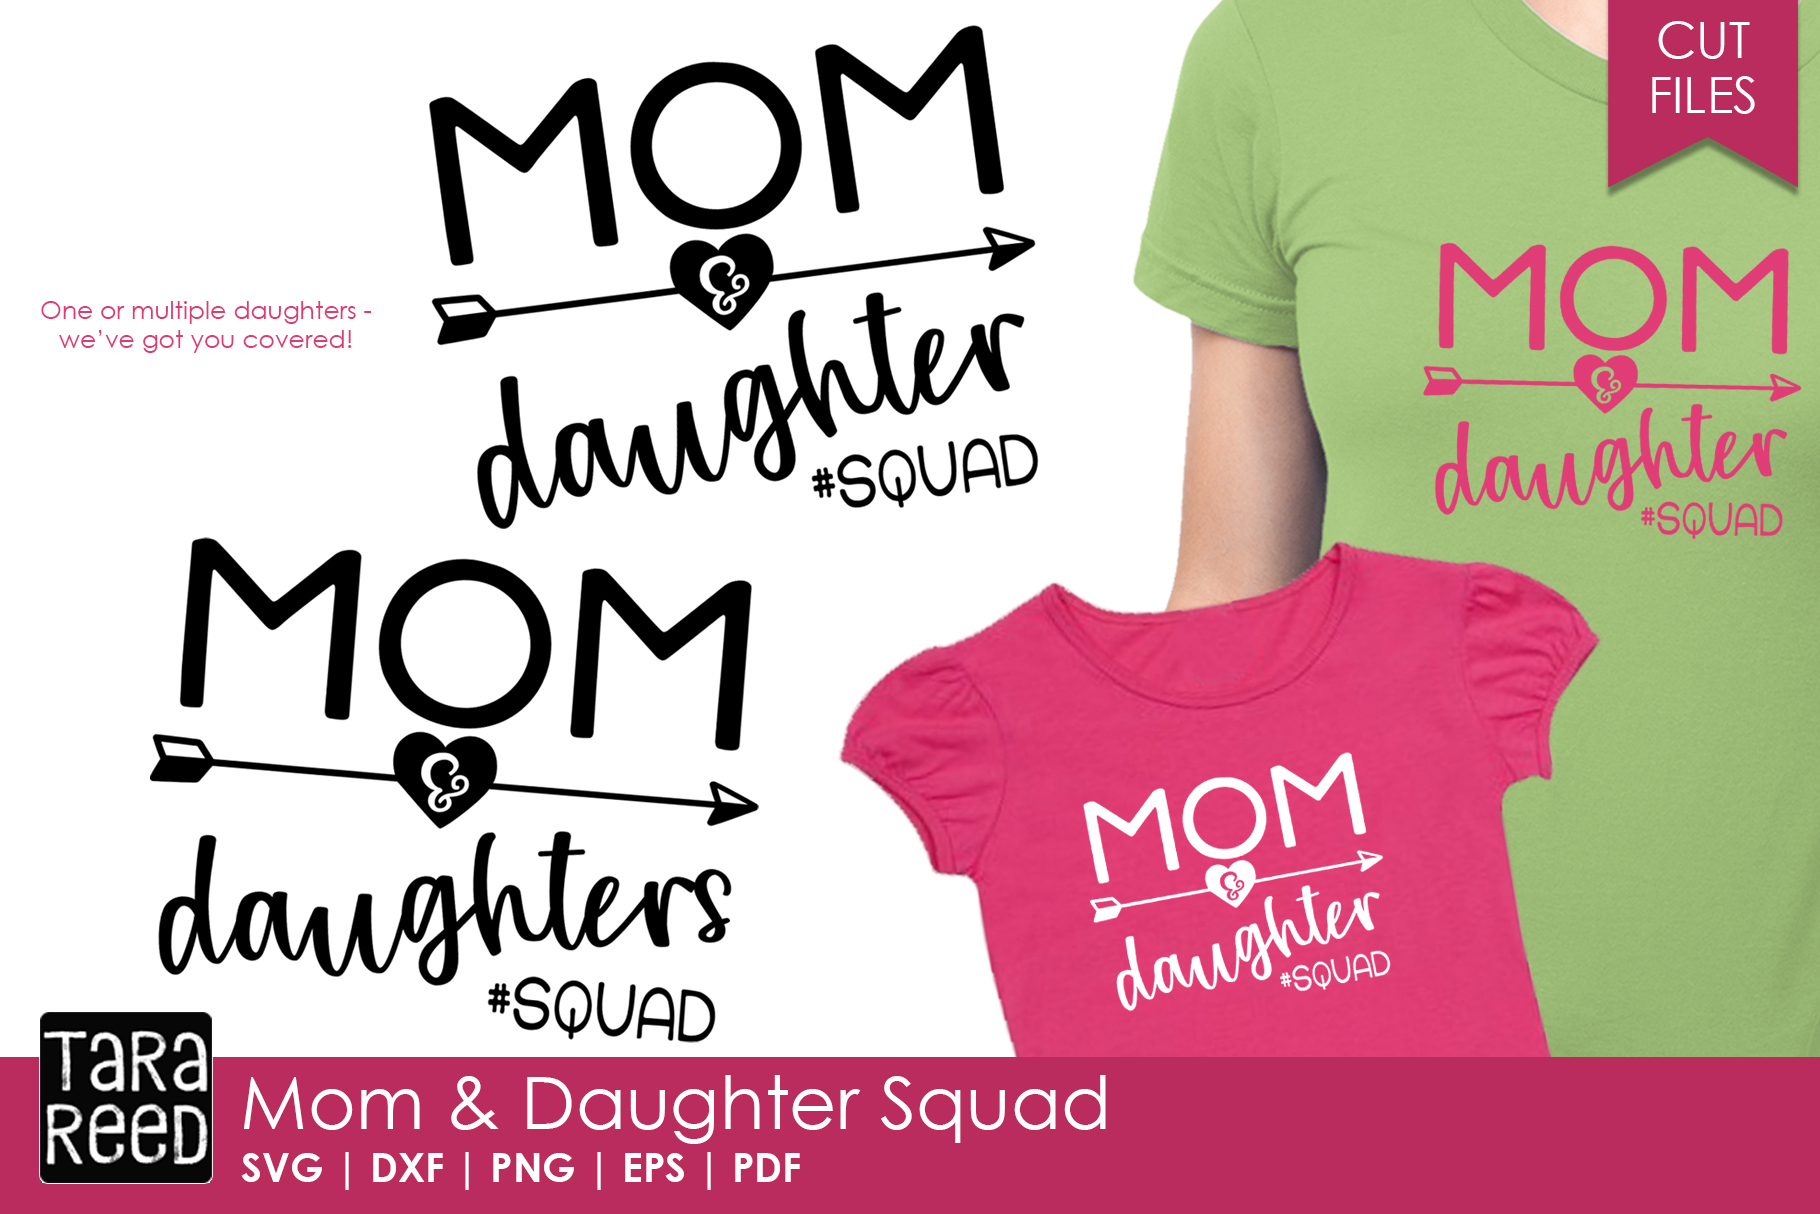 Download Mom & Daughter Squad - Family SVG and Cut Files for Crafters (333387) | Cut Files | Design Bundles